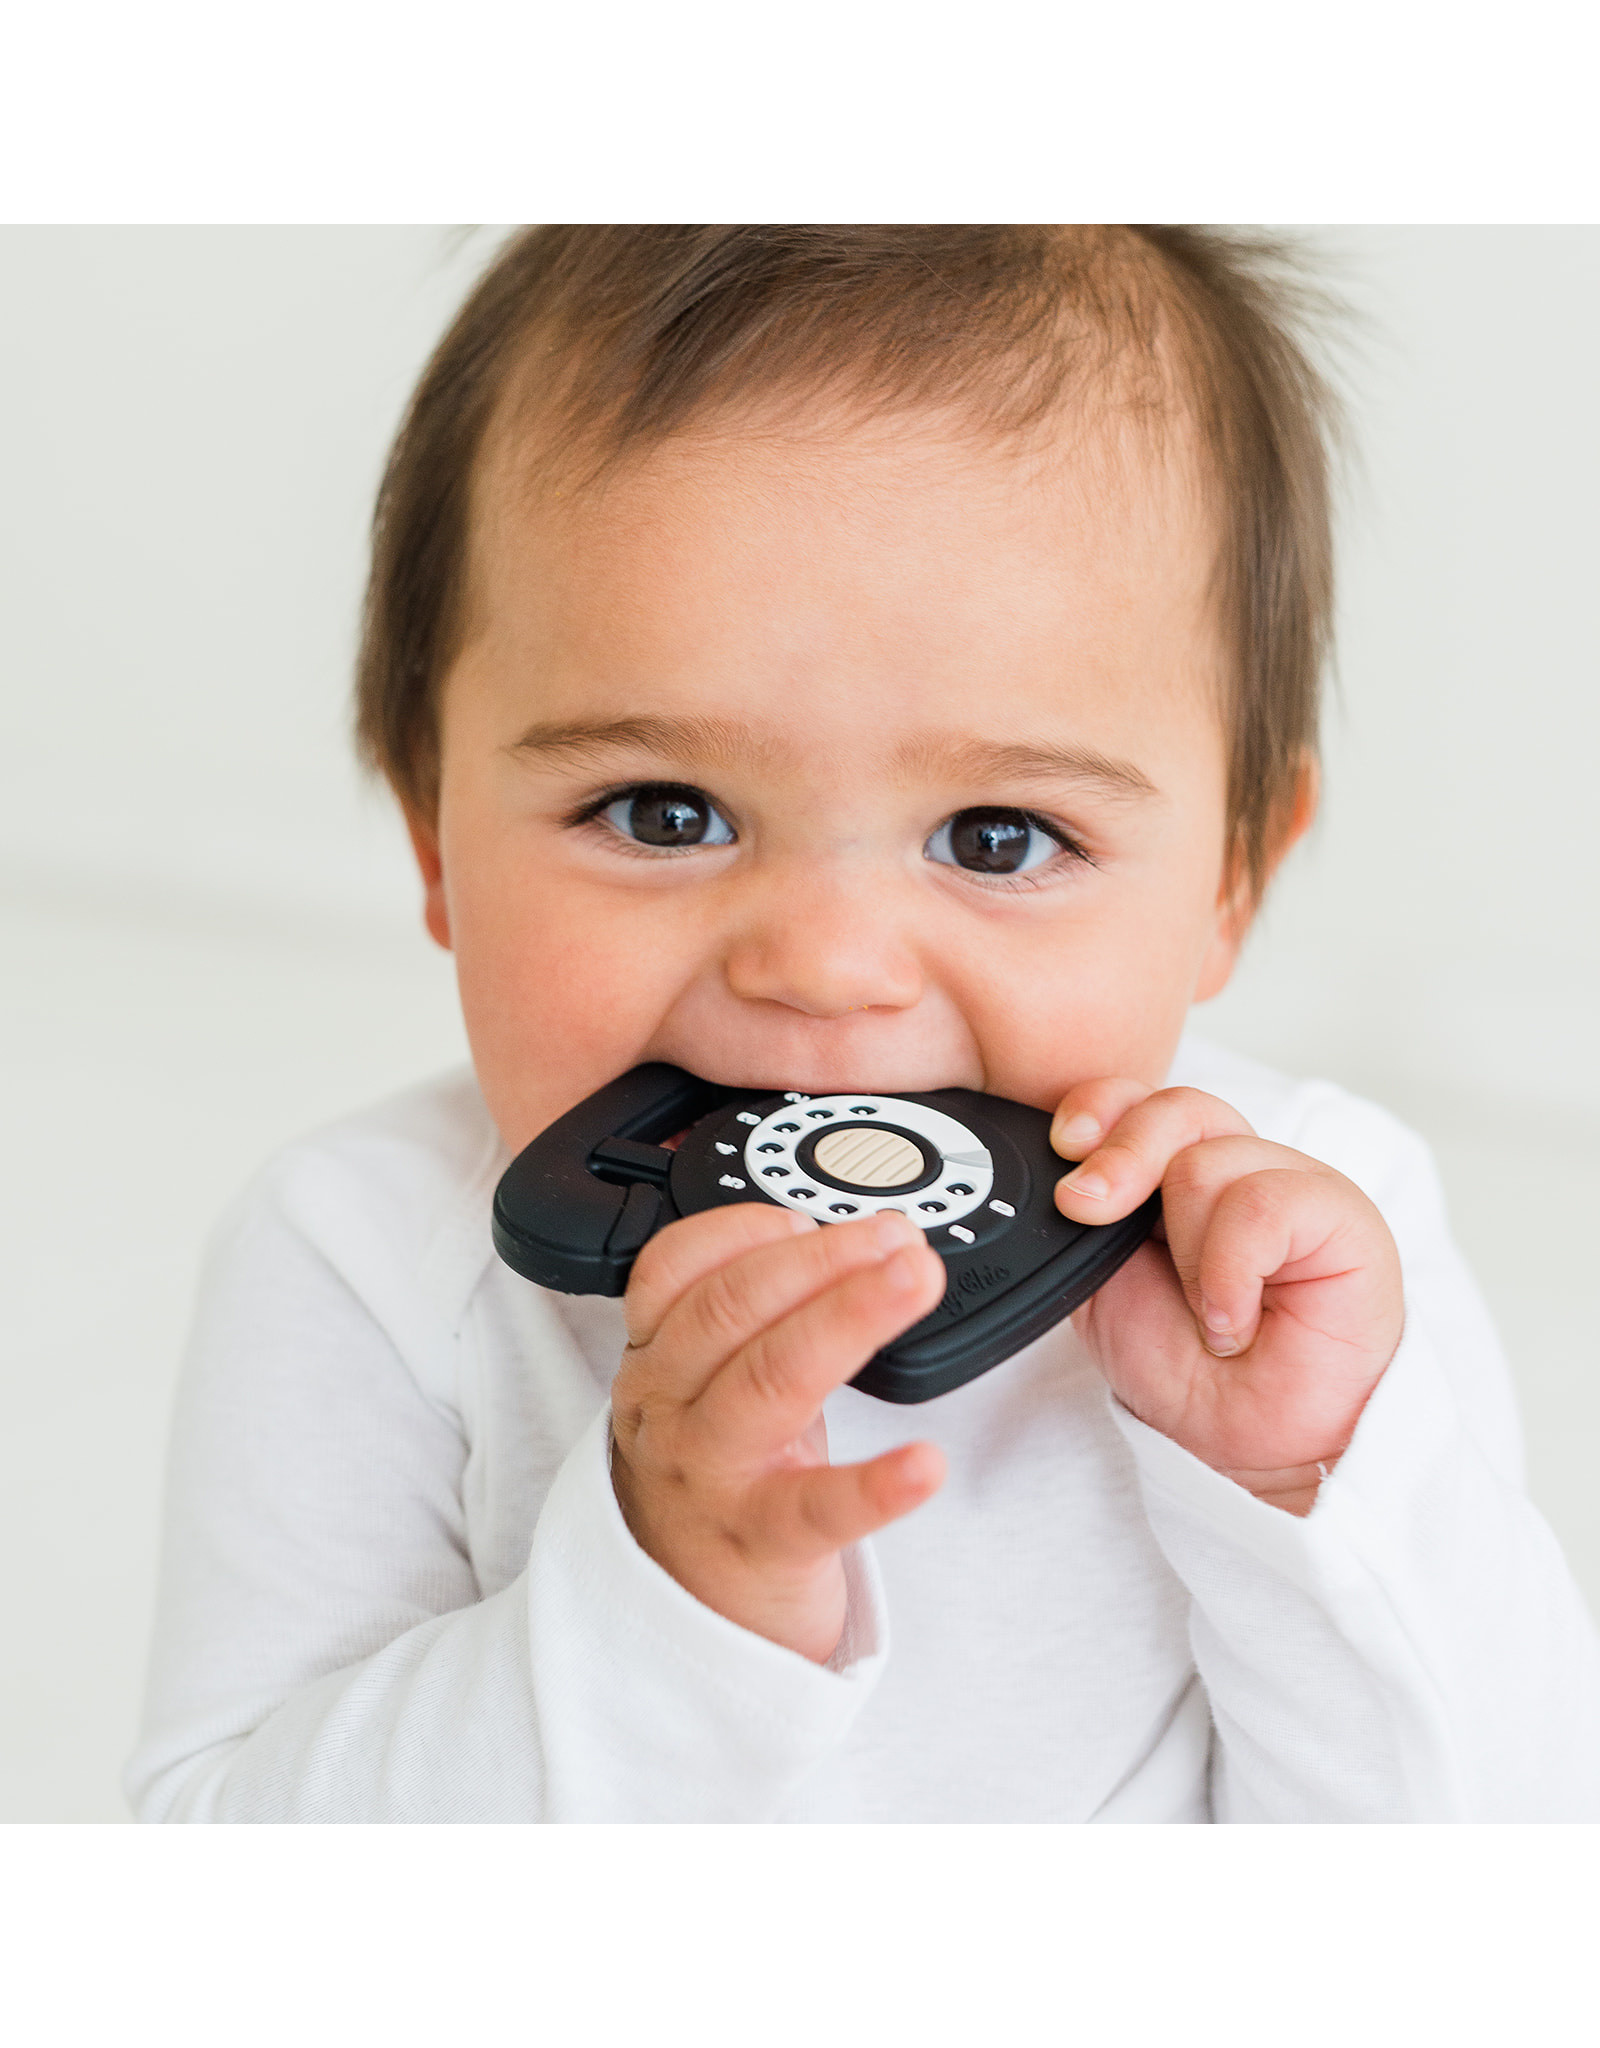 Gummy Chic Rotary Dial Phone Teether